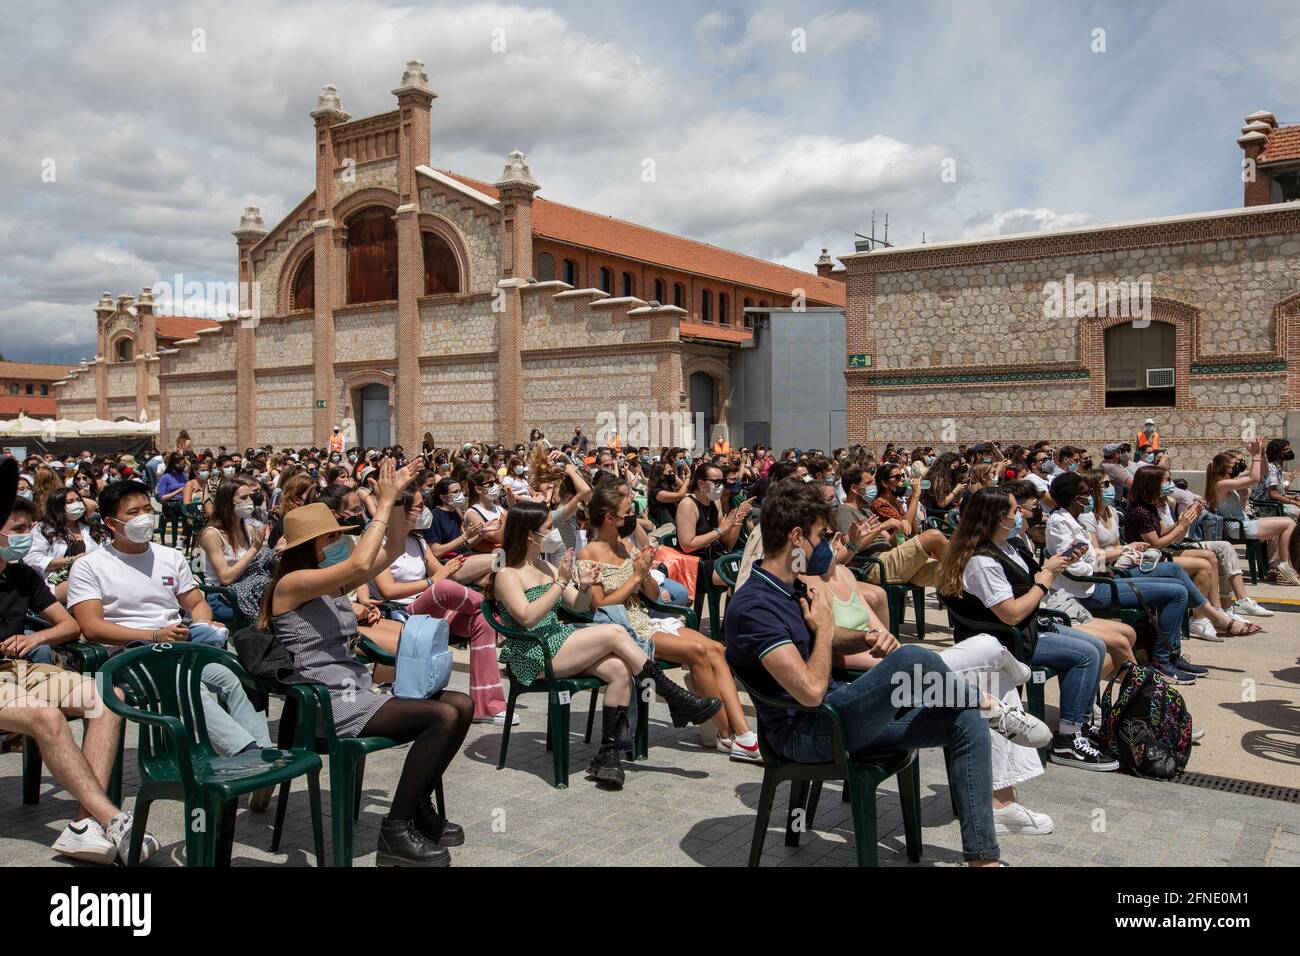 Madrid, Spain. 16th May, 2021. People wearing face masks attend a music  concert of singer Don Patricio in Matadero Madrid during the San Isidro  Festivities. The Festivities of San Isidro 2021 are